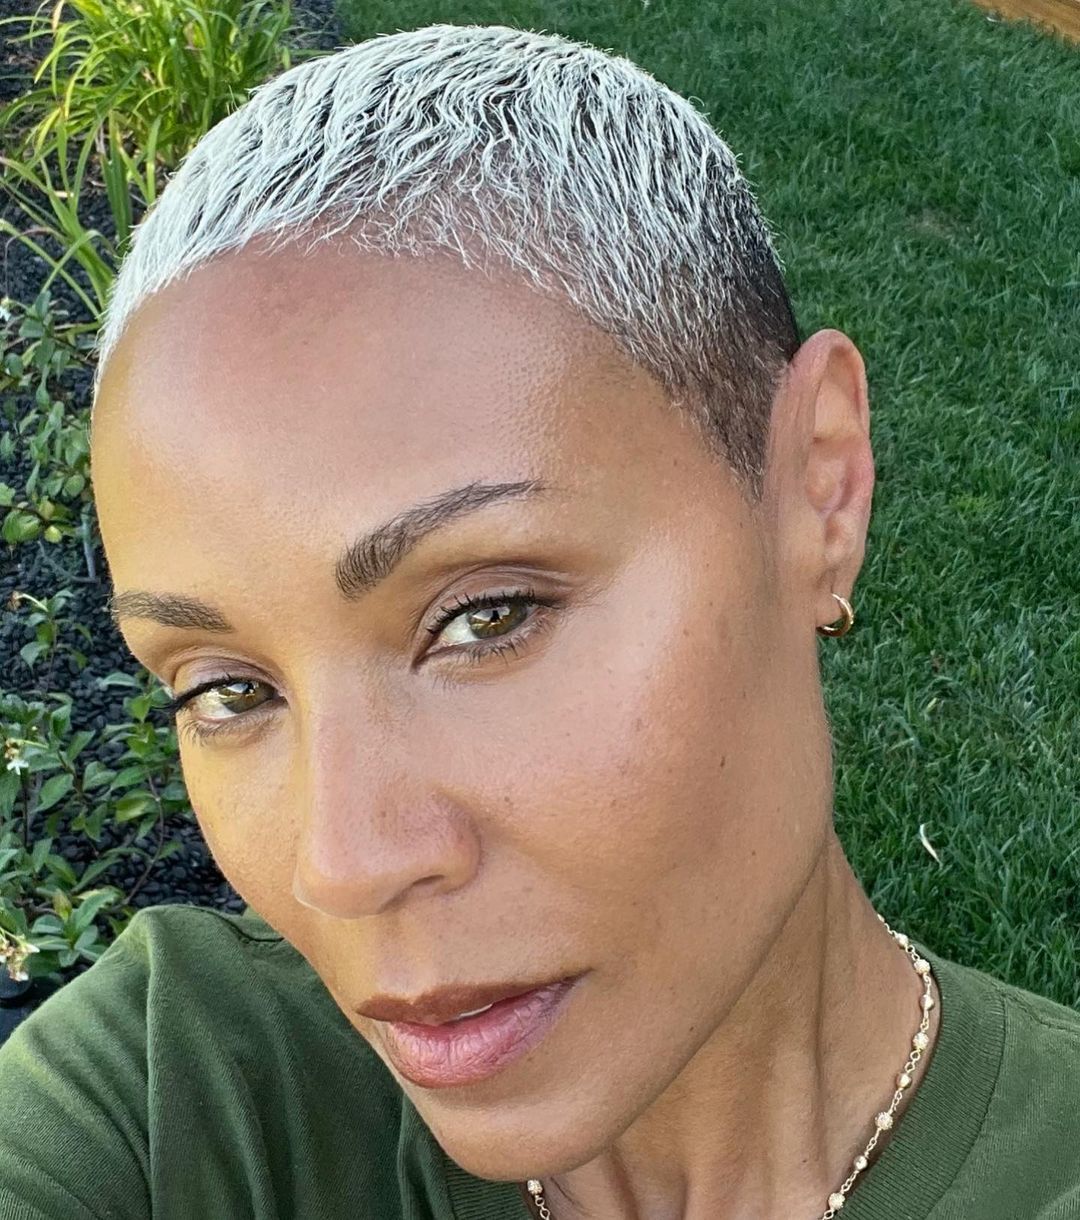 The "Girls Trip" actress shared a selfie showing off her hair growth.